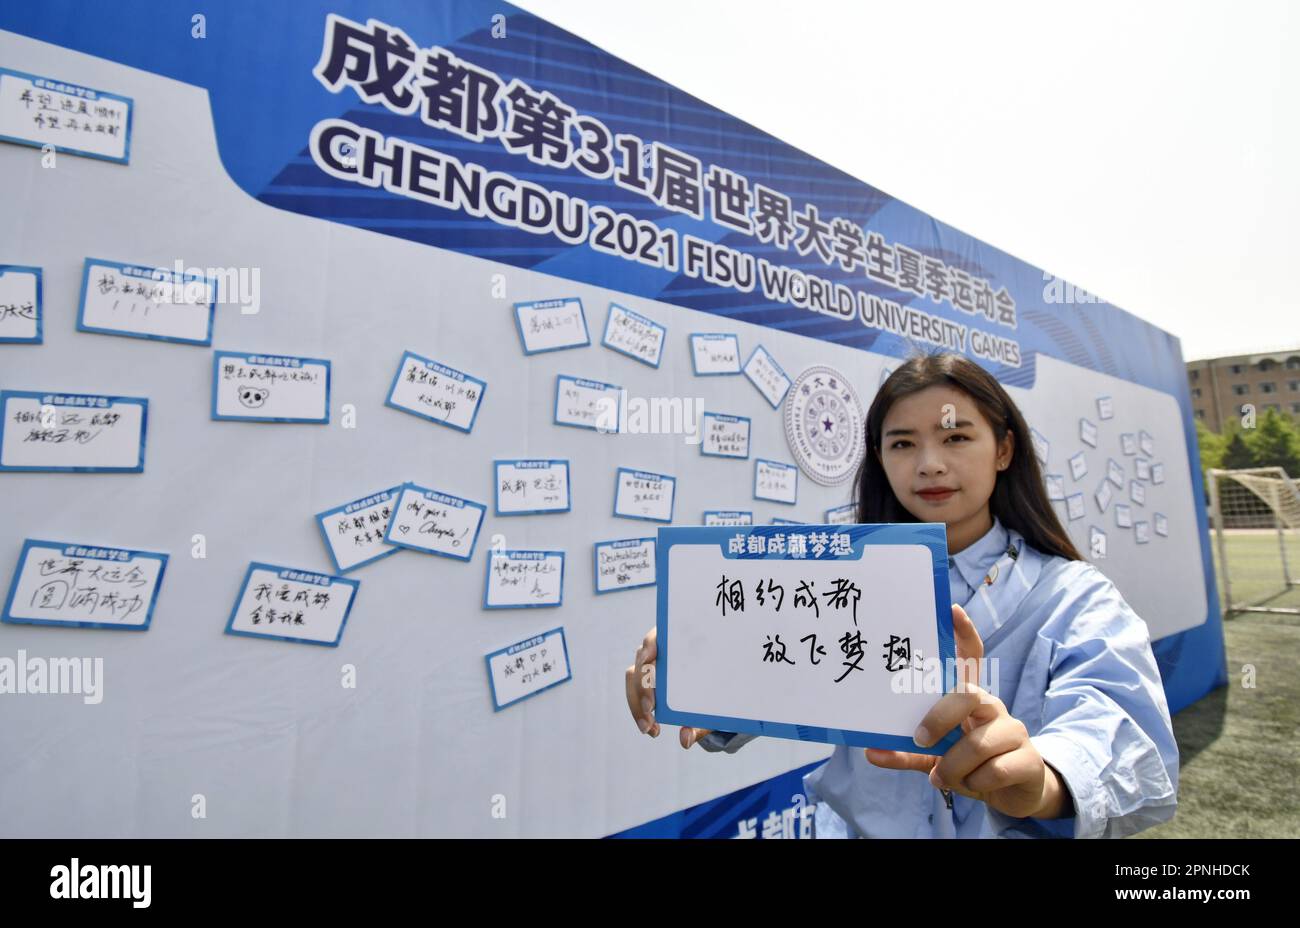 (230419) -- BEIJING, April 19, 2023 (Xinhua) -- A student of Tsinghua University poses with a handwritten message card with her wishes for Chengdu during an event in celebration of the 100-day countdown to the Chengdu 2021 FISU World University Games at Tsinghua University in Beijing, capital of China, April 19, 2023. (Xinhua/Li Xin) Stock Photo